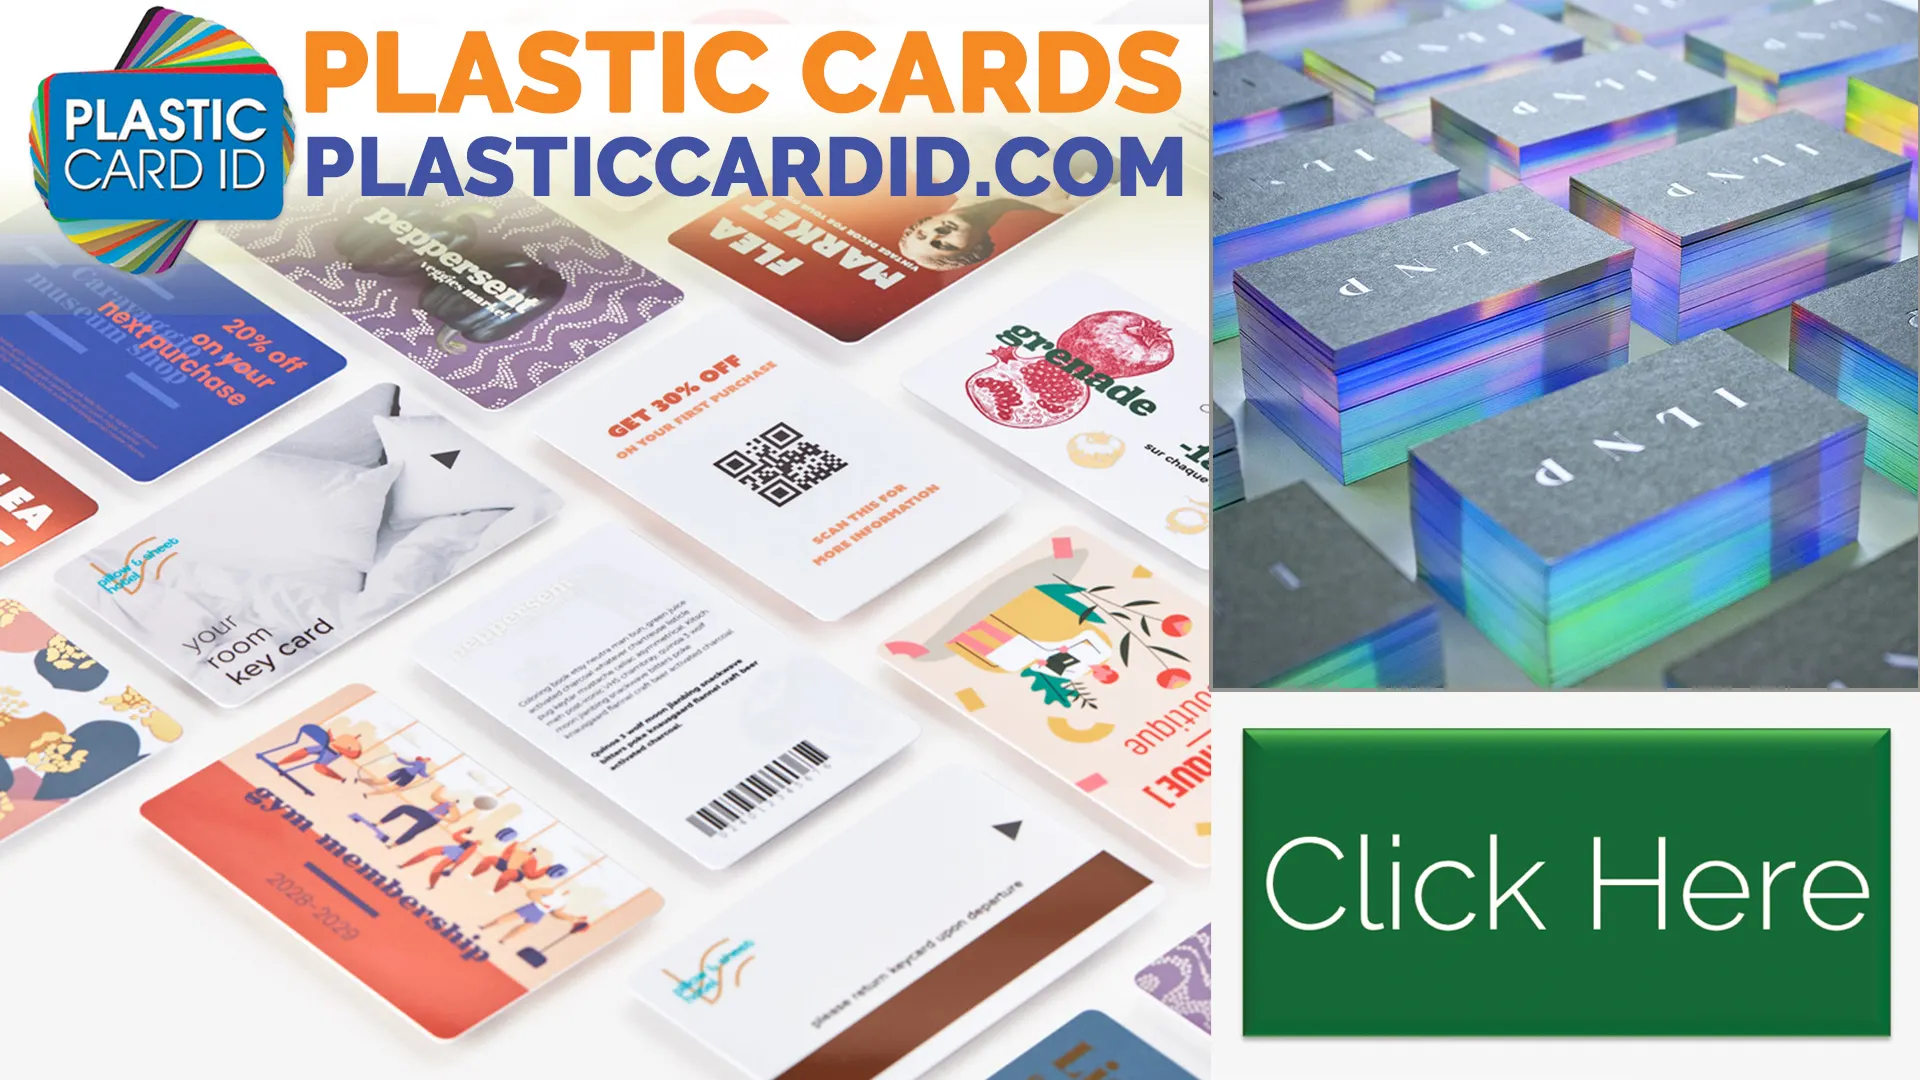 Welcome to the World of Controlled Spendings and Business Empowerment with Plastic Card ID




